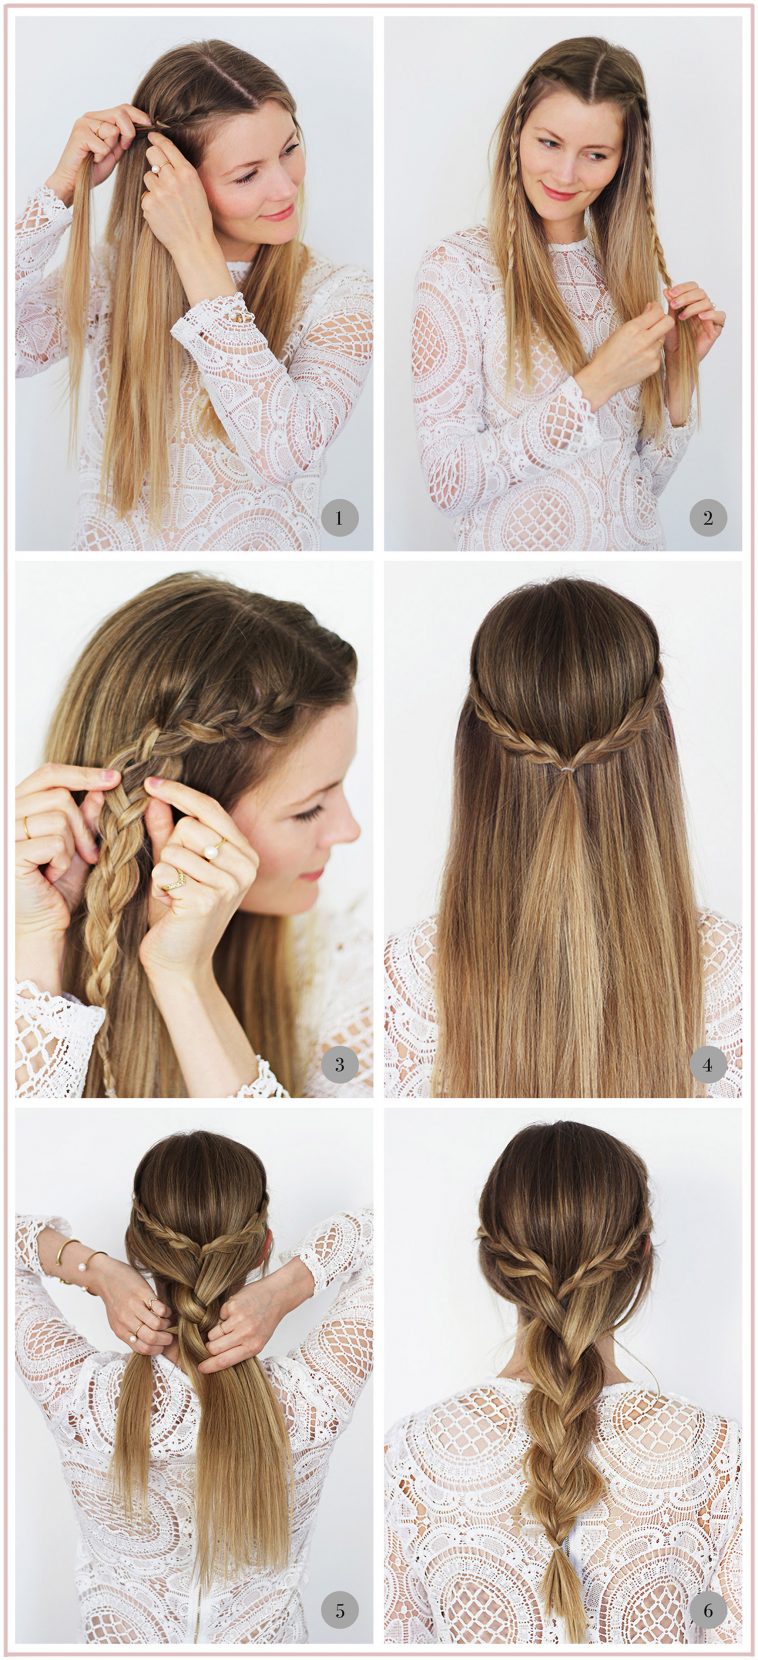 10 of The Best & Most Unique Hairstyle That You Can Do At Home!